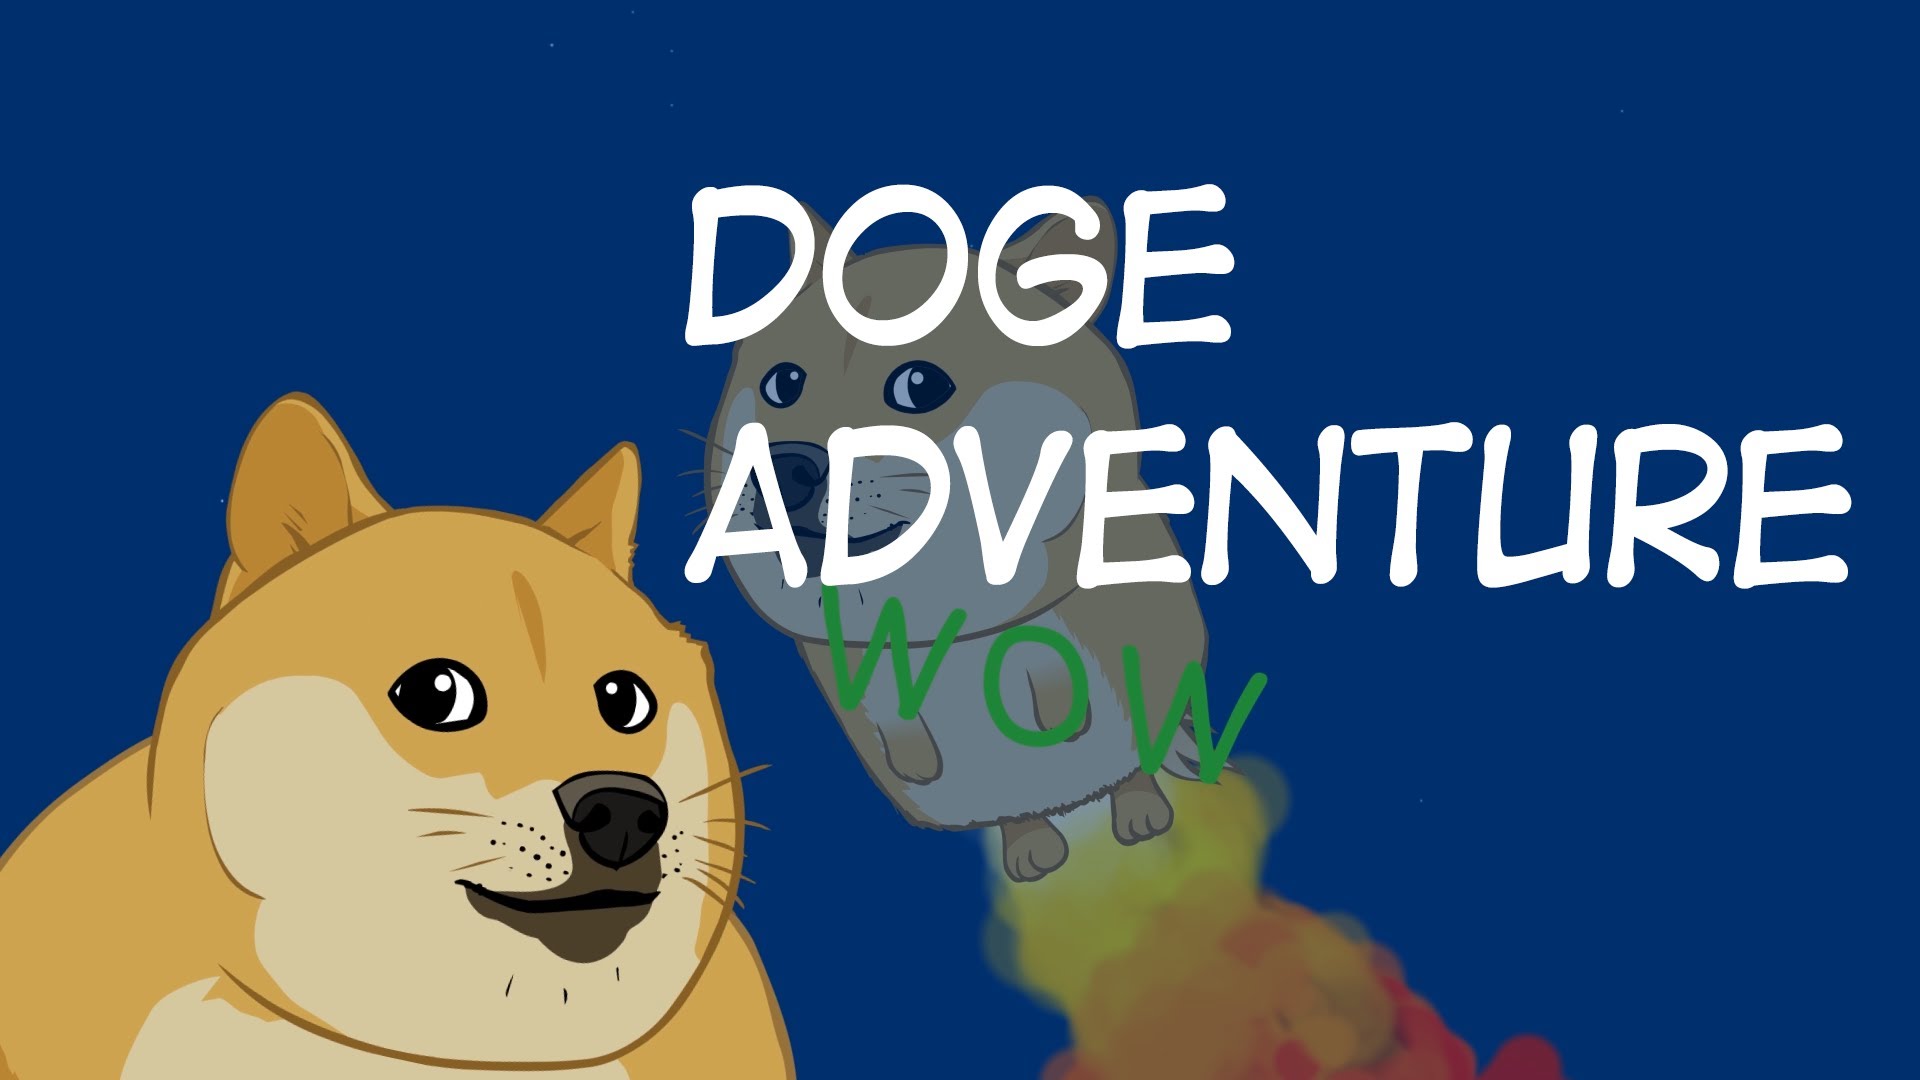 Doge Adventure, Doge Blasts Off Into Space in New Weebl Animation